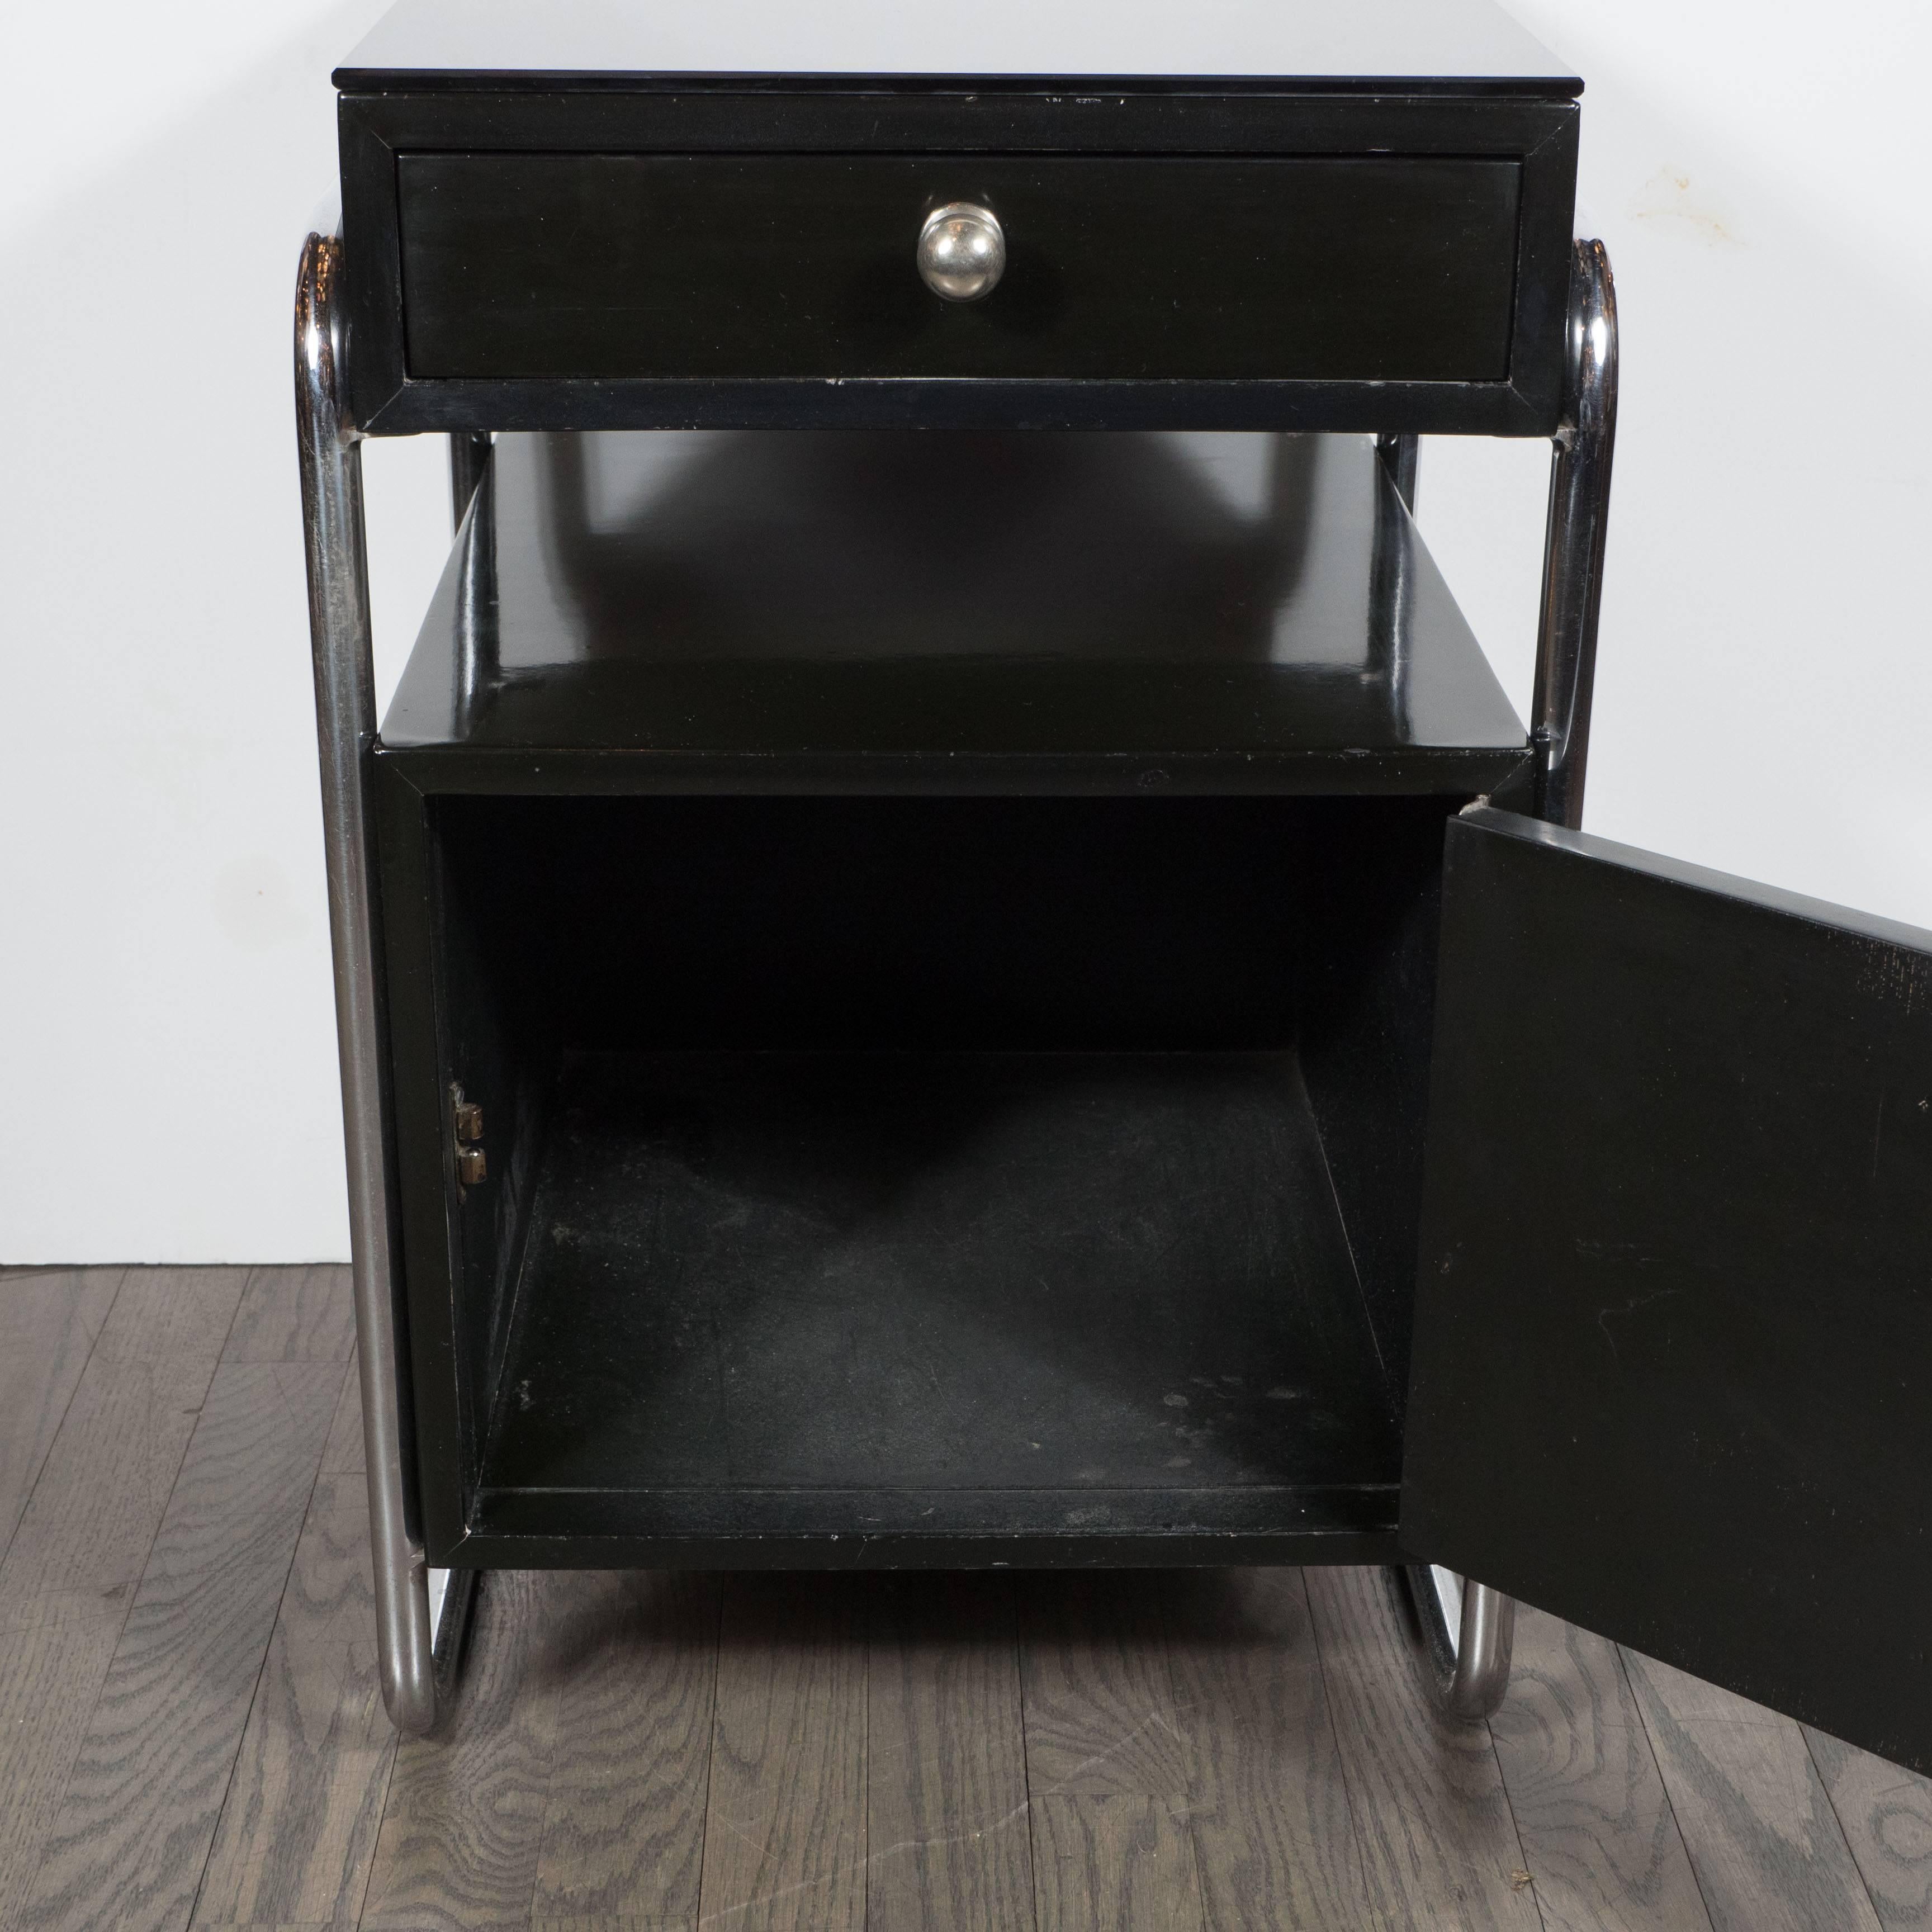 A pair of Art Deco Machine Age end tables or nightstands in black lacquer and vitrolite by Wolfgang Hoffman. Tubular chrome frames support a lower storage section with door, center shelf, and upper drawer. Chrome ball handles adorn both storage